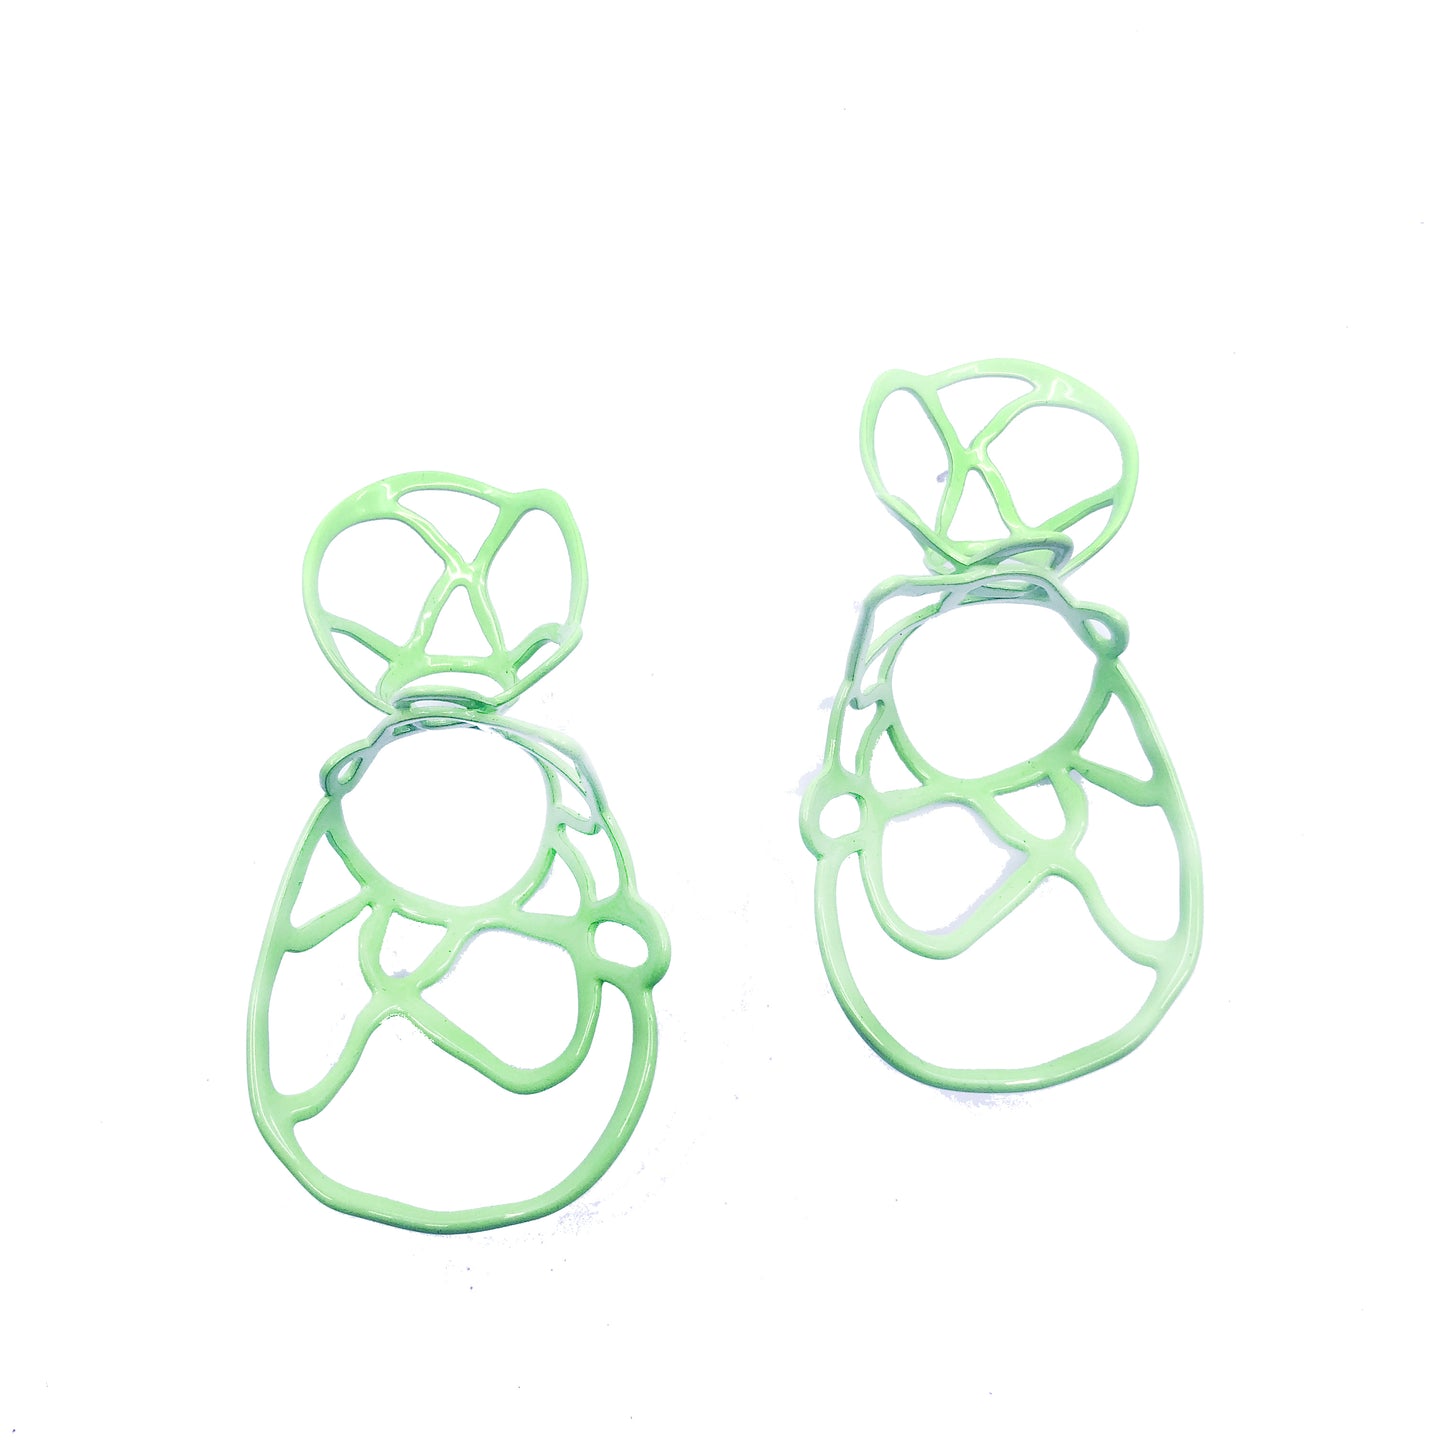 Mint sculptural double lace statement earrings on white background.